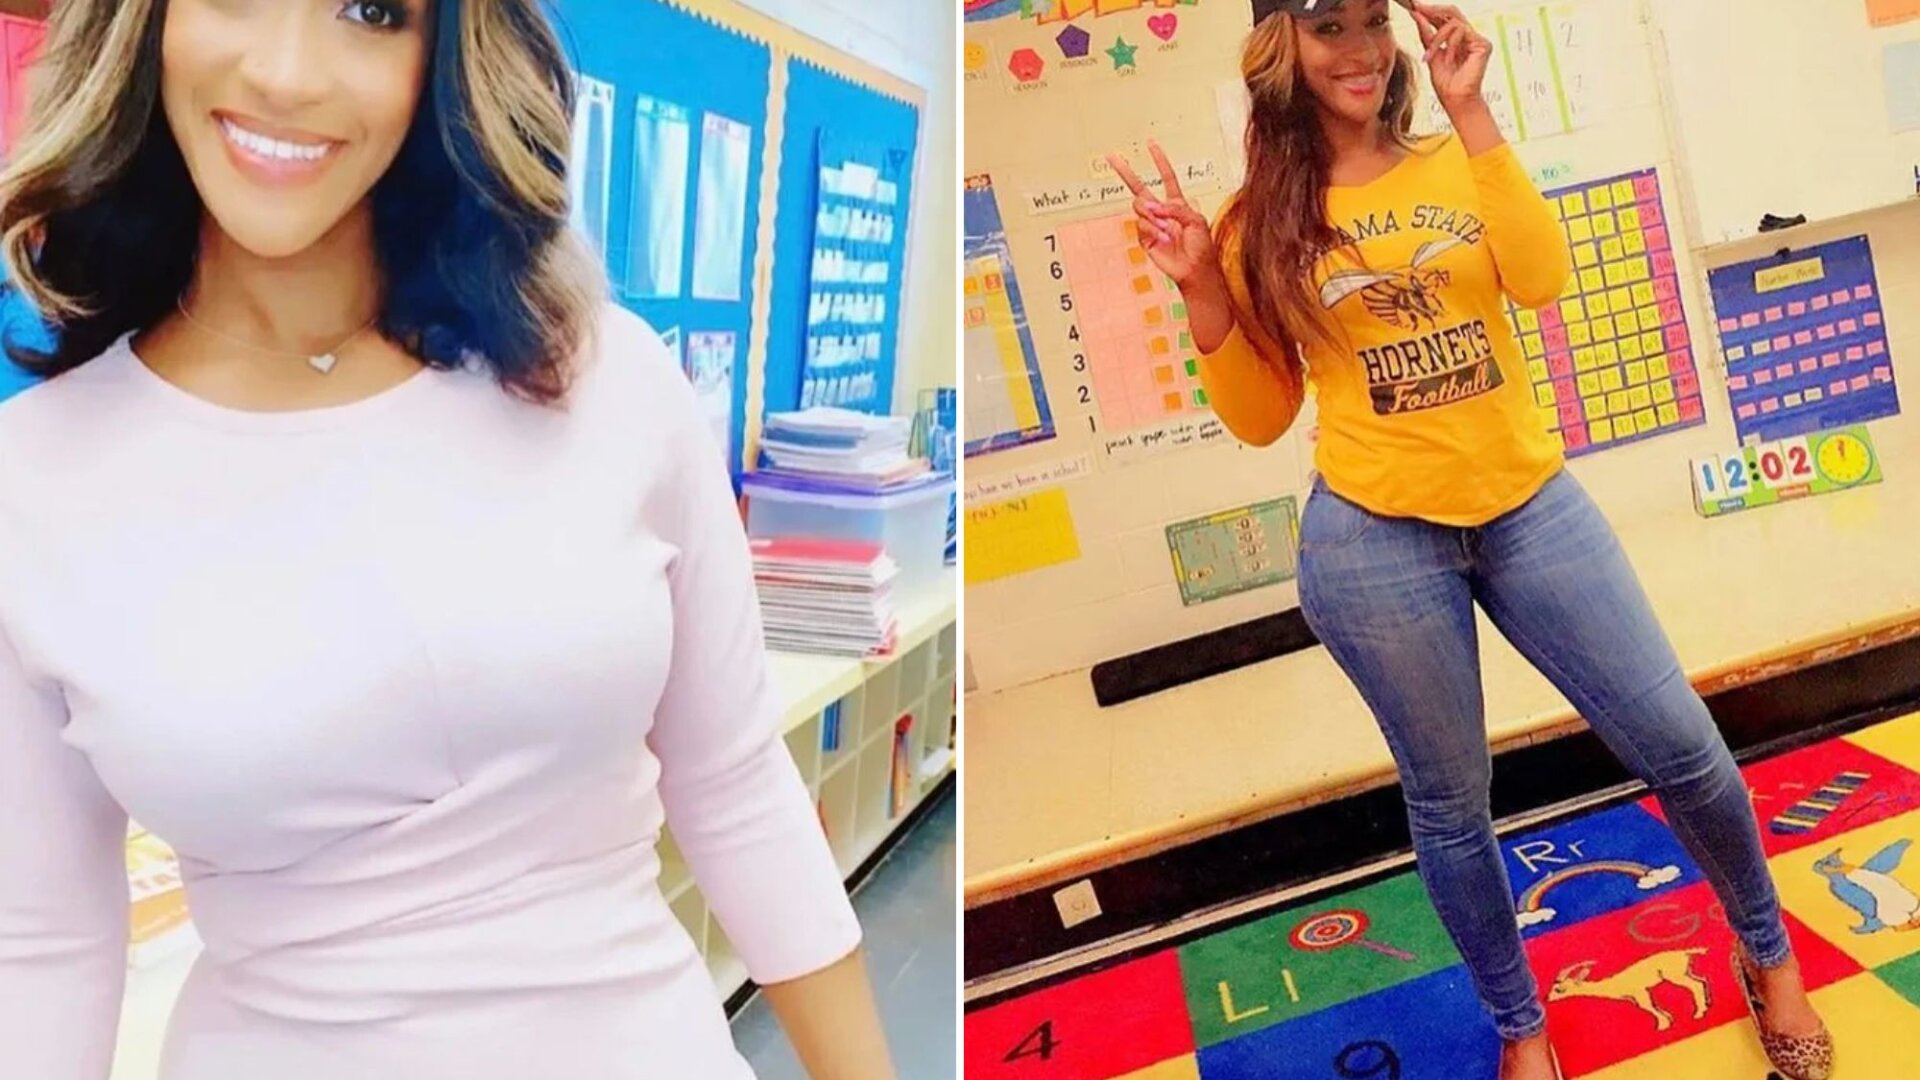 Teacher Bullied And Fired For Being “Too Sexy” For The Classroom